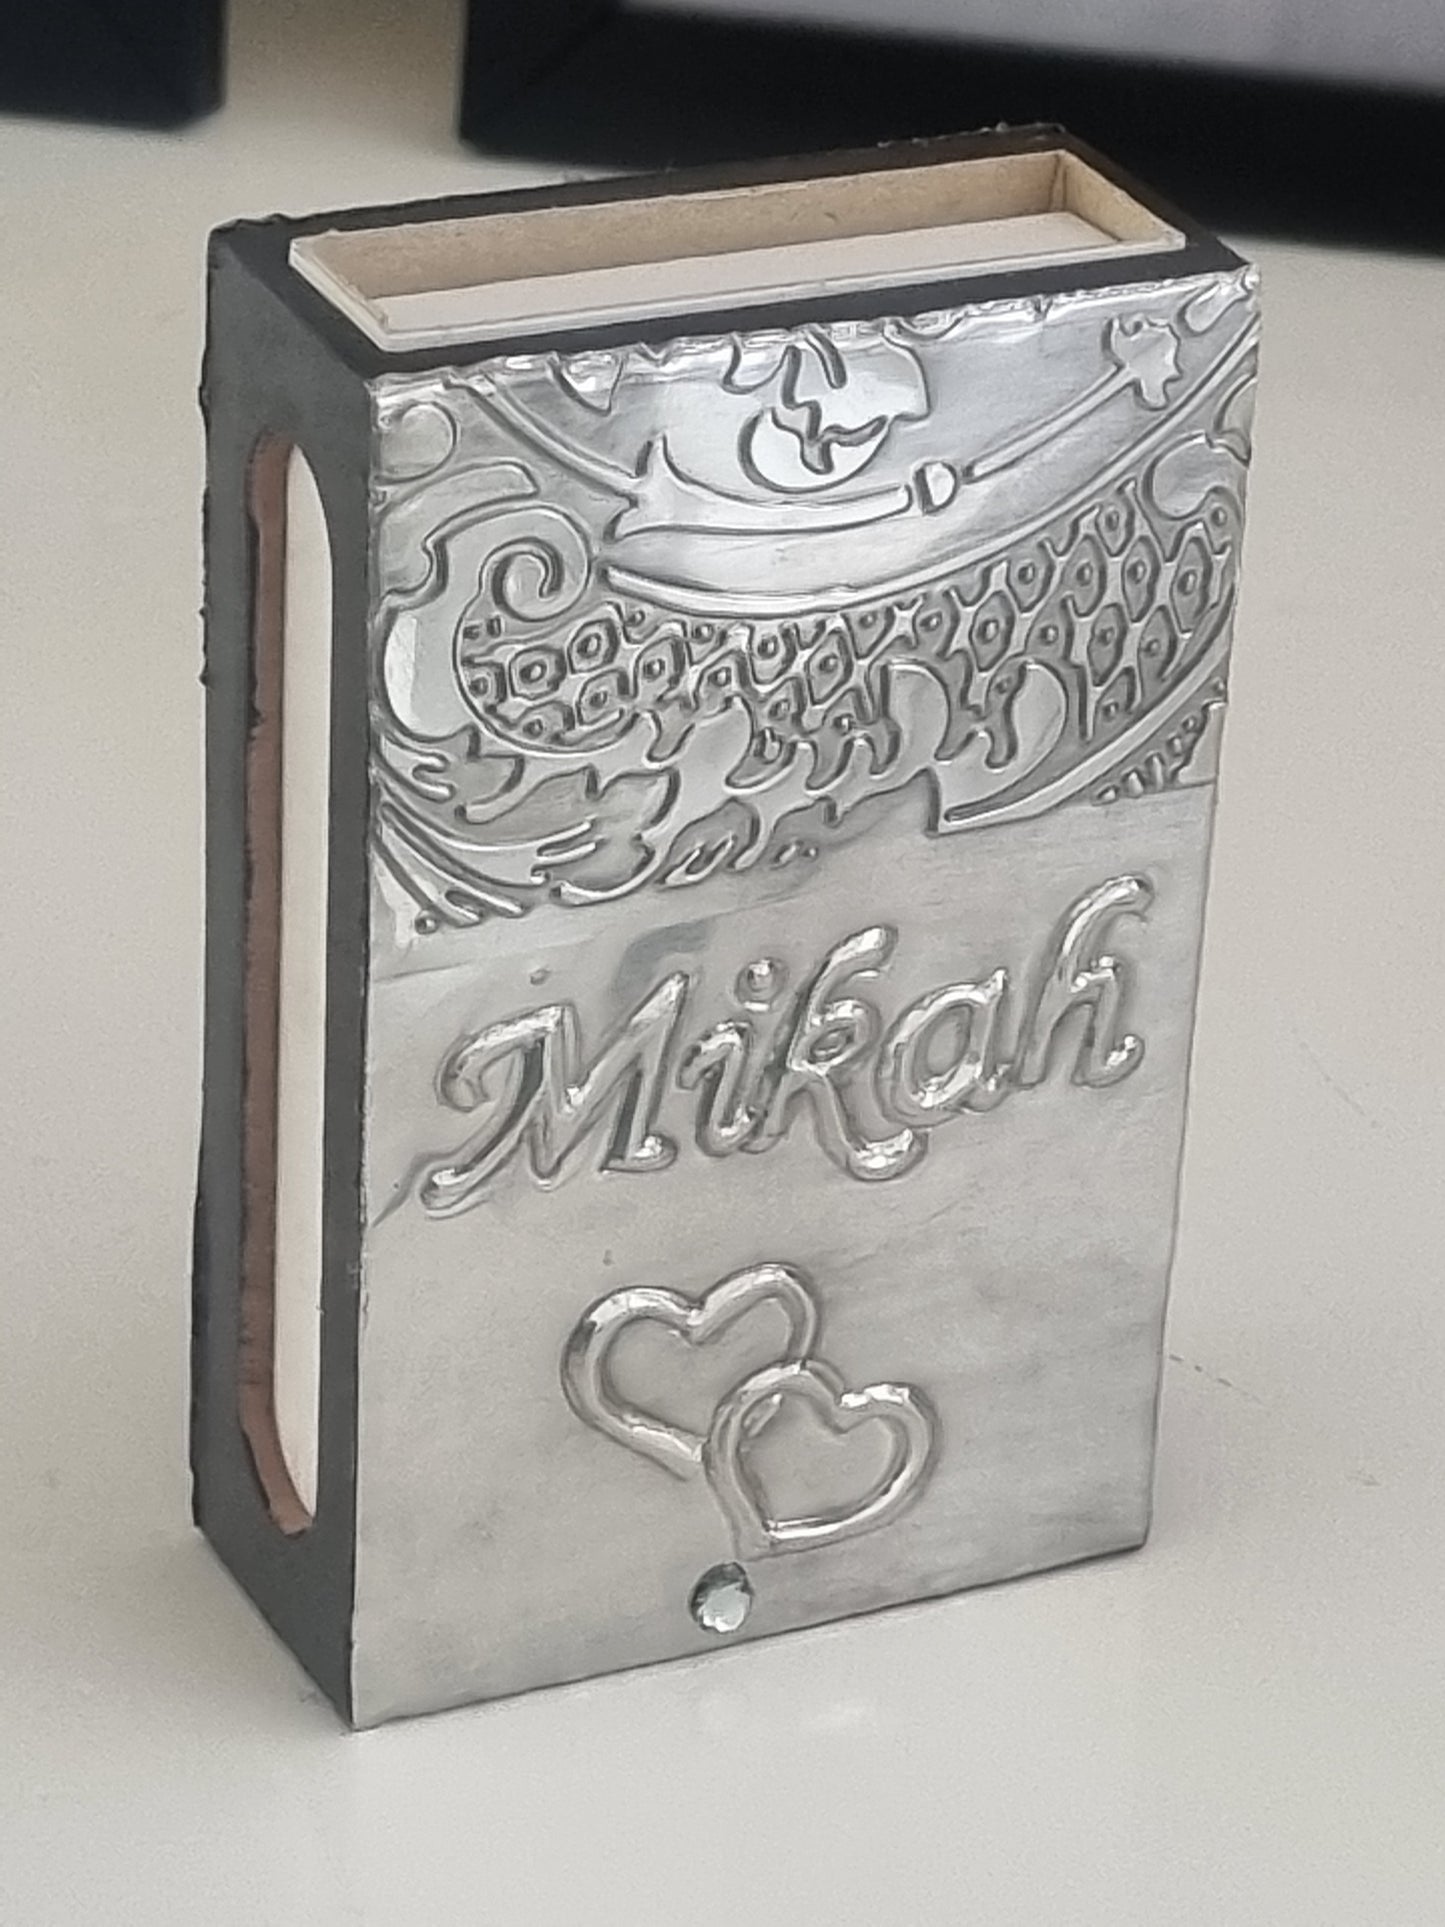 Large match box cover